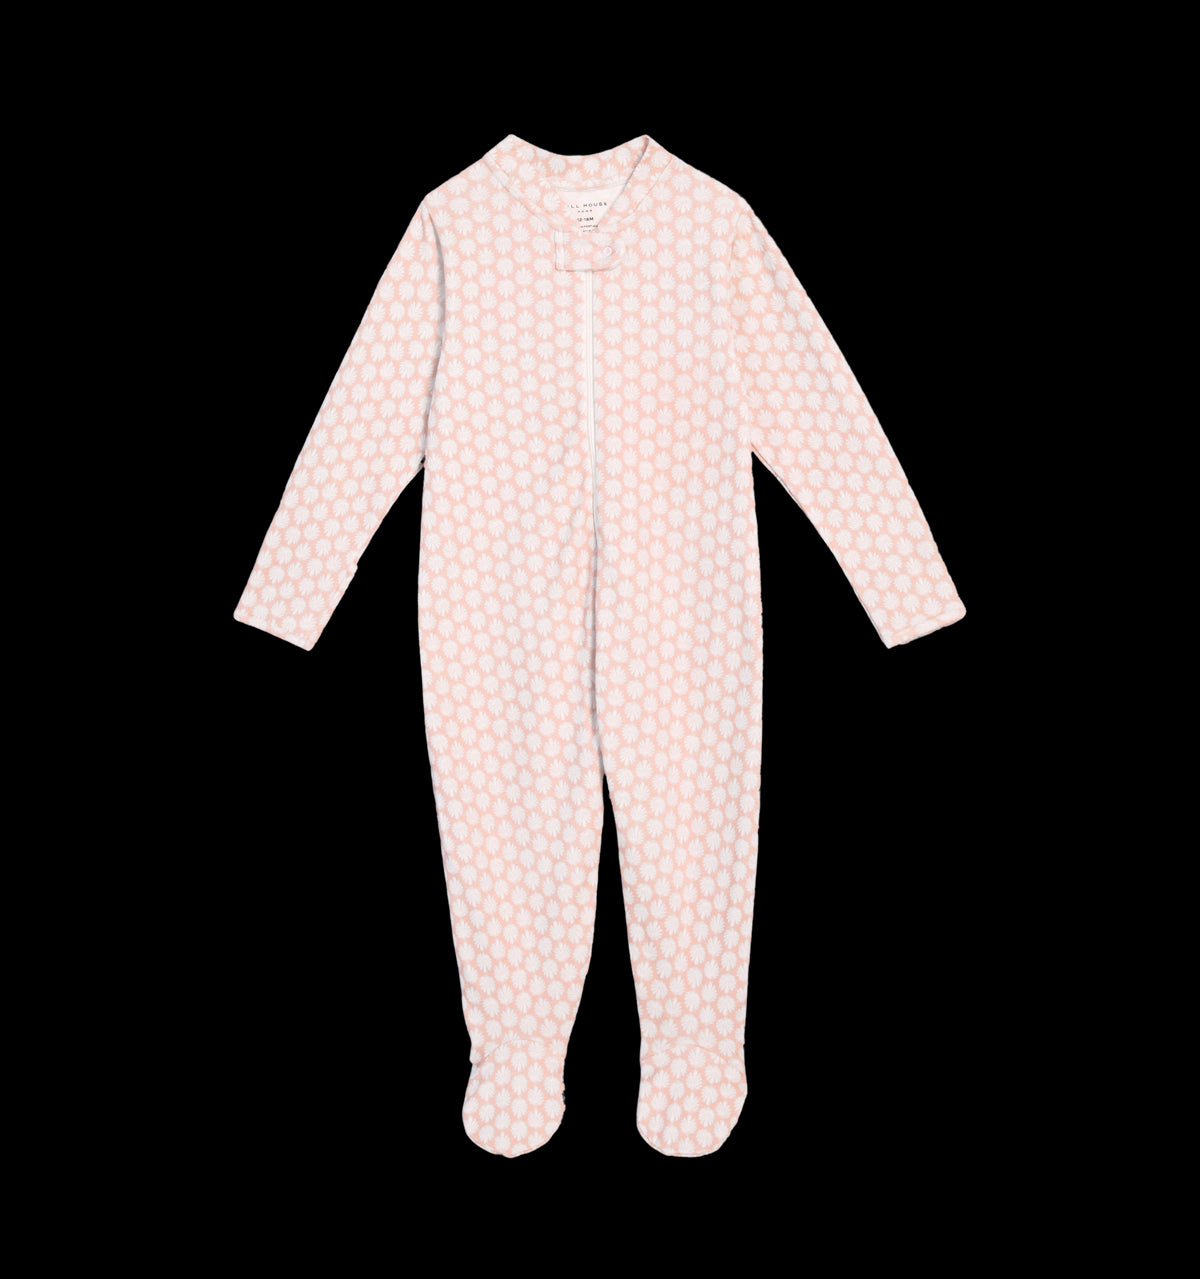 The Onesie in Coral Baroque Shell